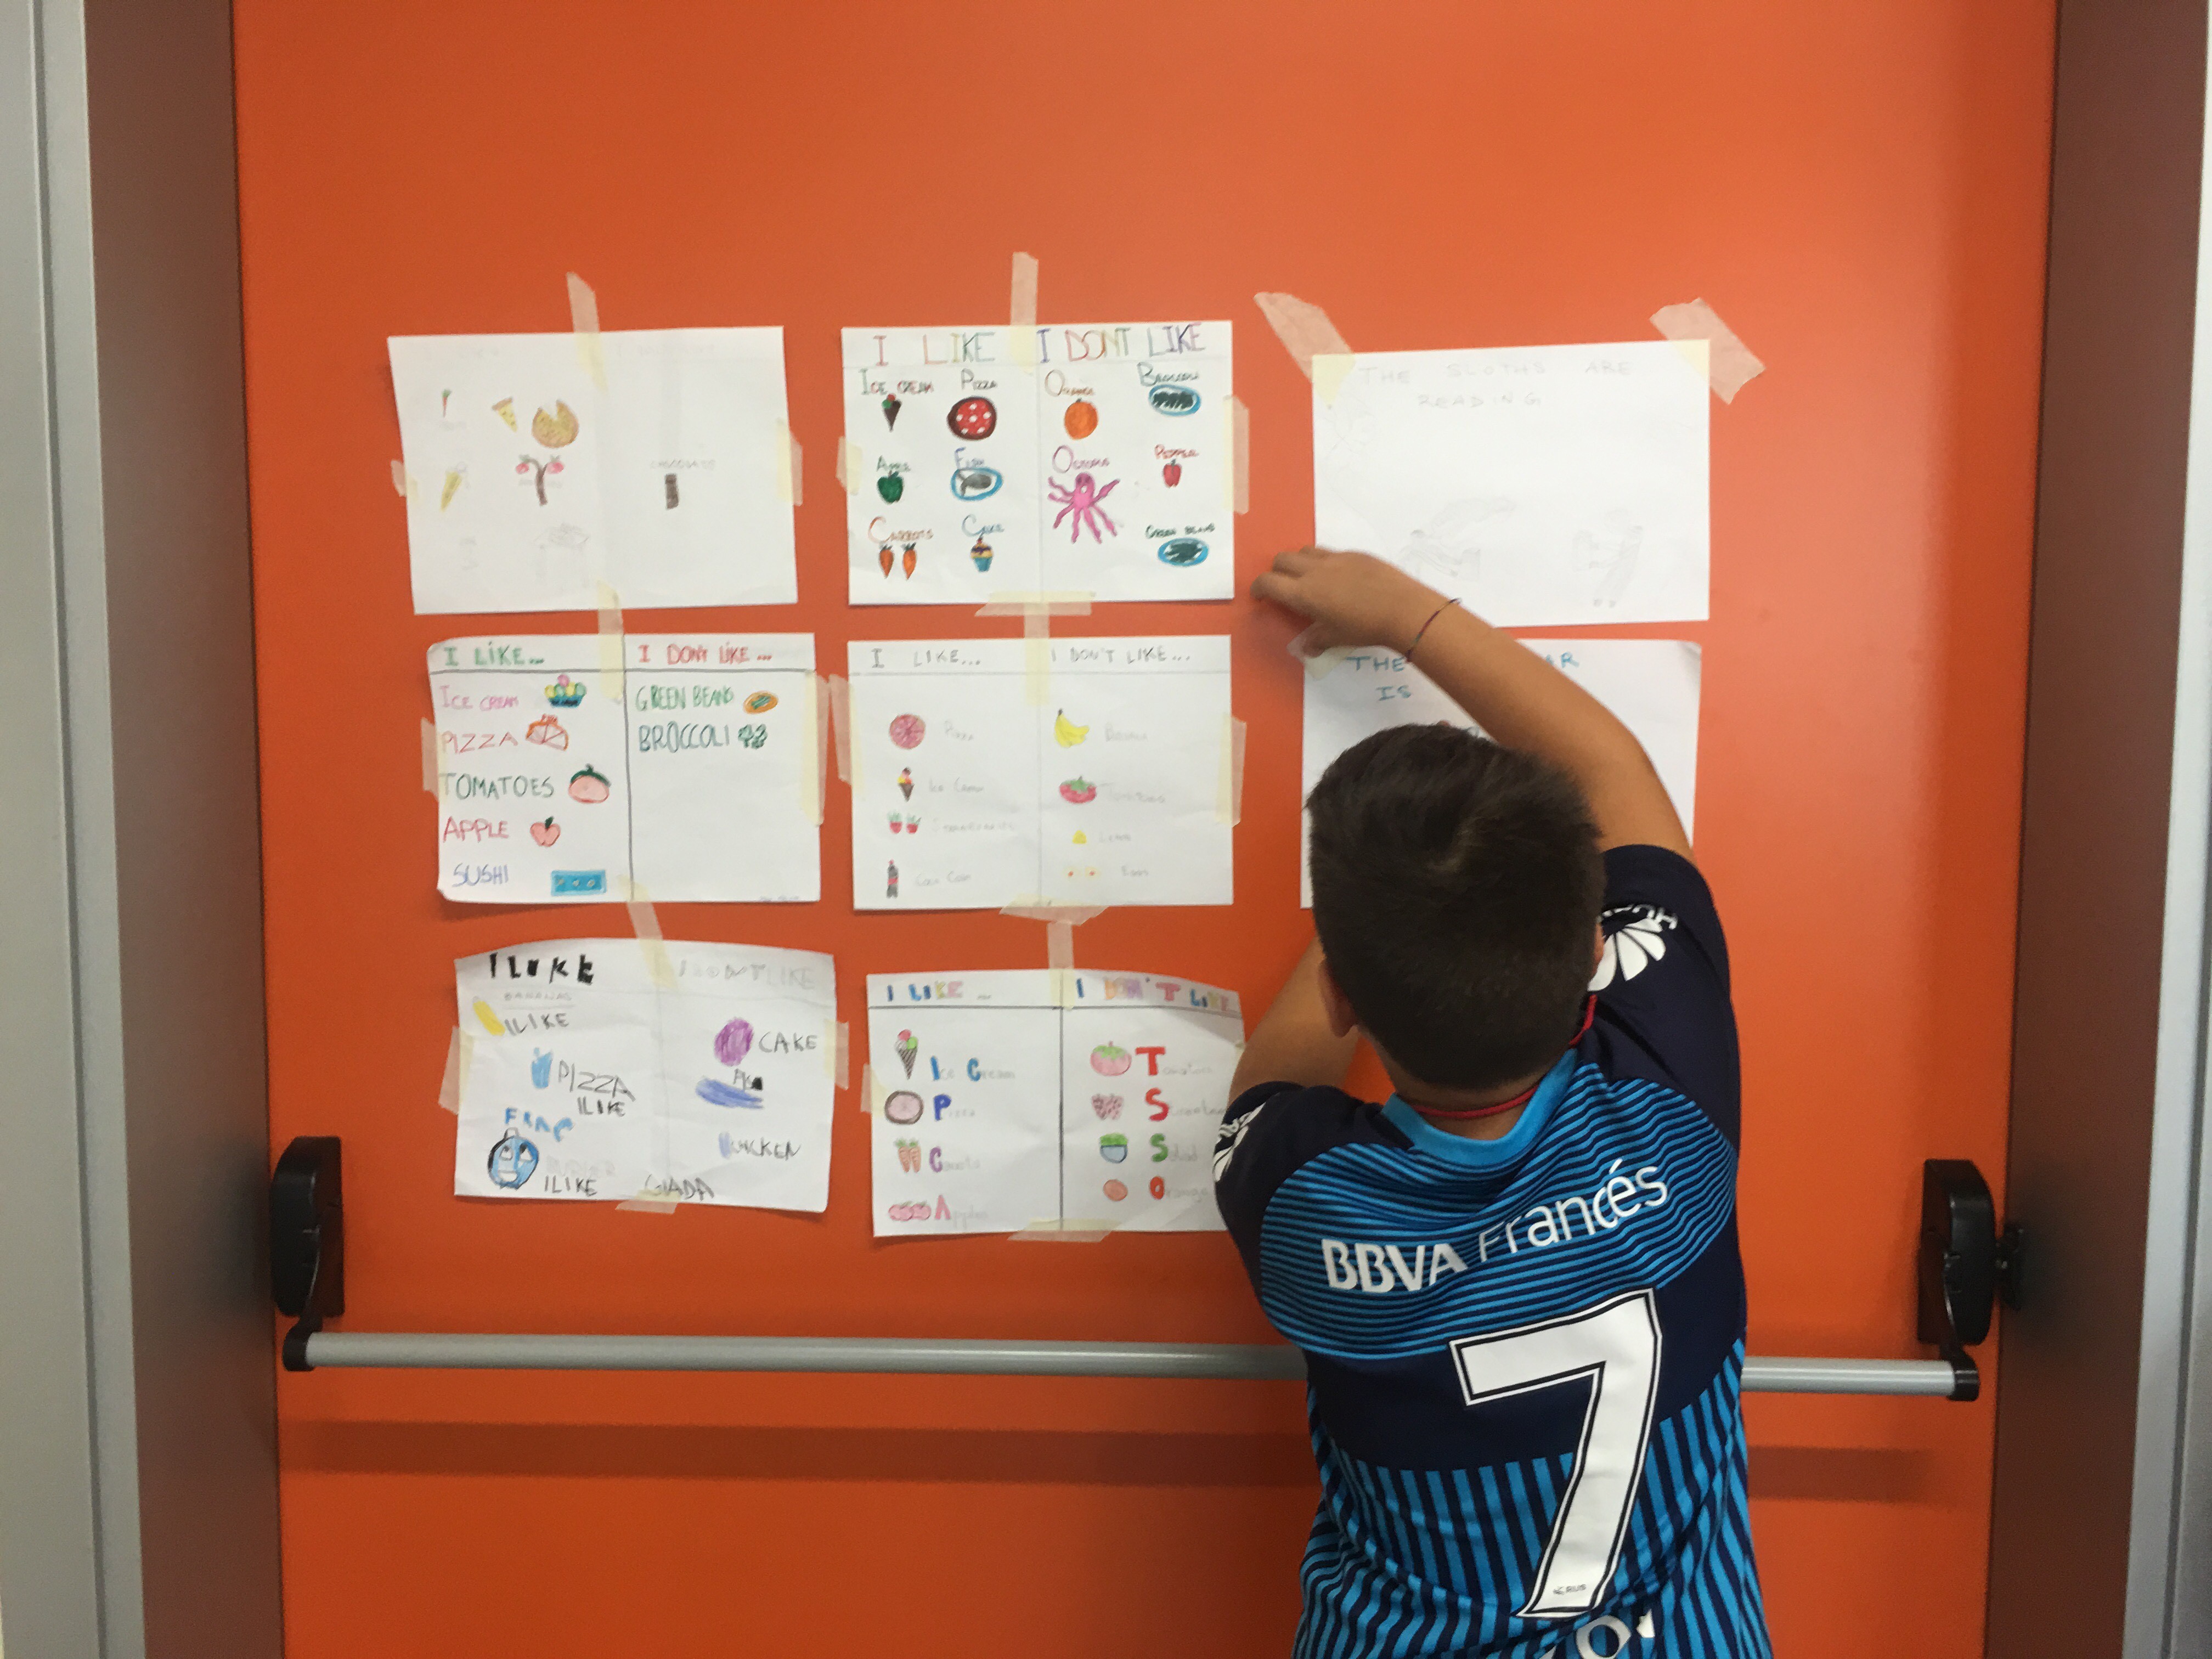 A young boy with his back to the camera posts a drawing on an orange wall next to several other drawings.